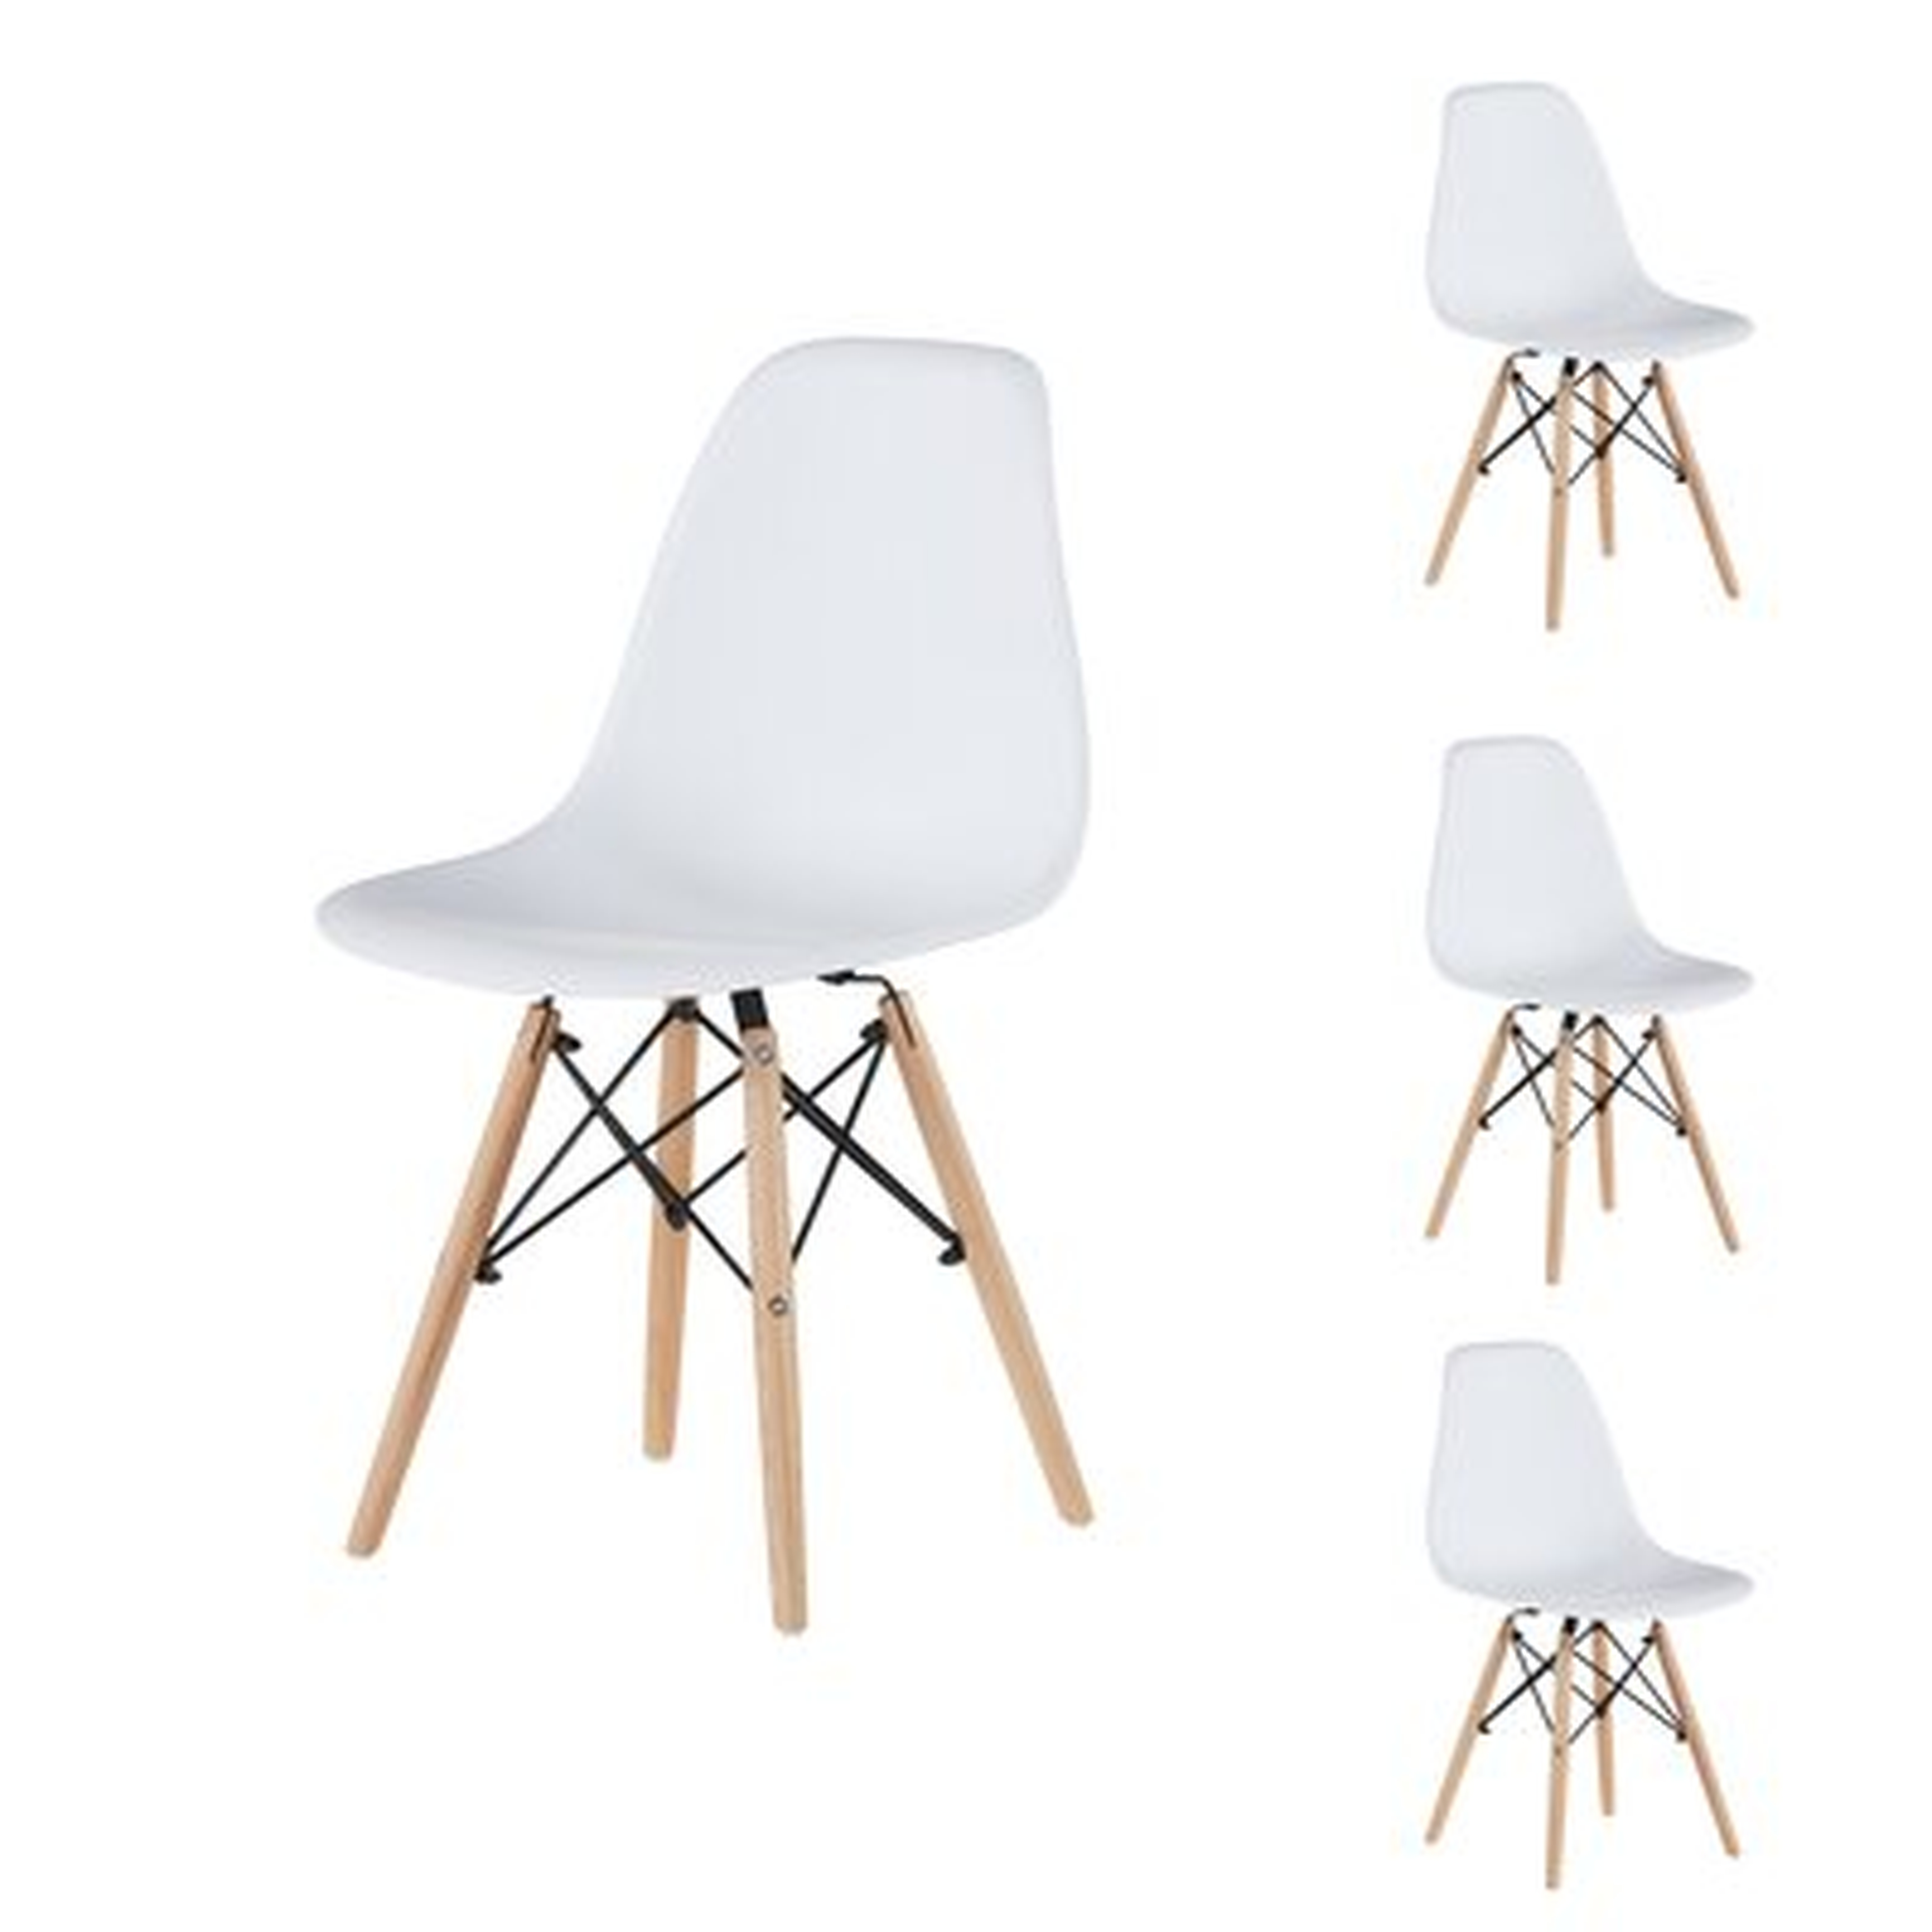 Light Gray Simple Fashion Leisure Plastic Chair Environmental Protection Pp Material Thickened Seat Surface Solid Wood Leg Dressing Stool Restaurant Outdoor Cafe Chair Set Of 4 - Wayfair